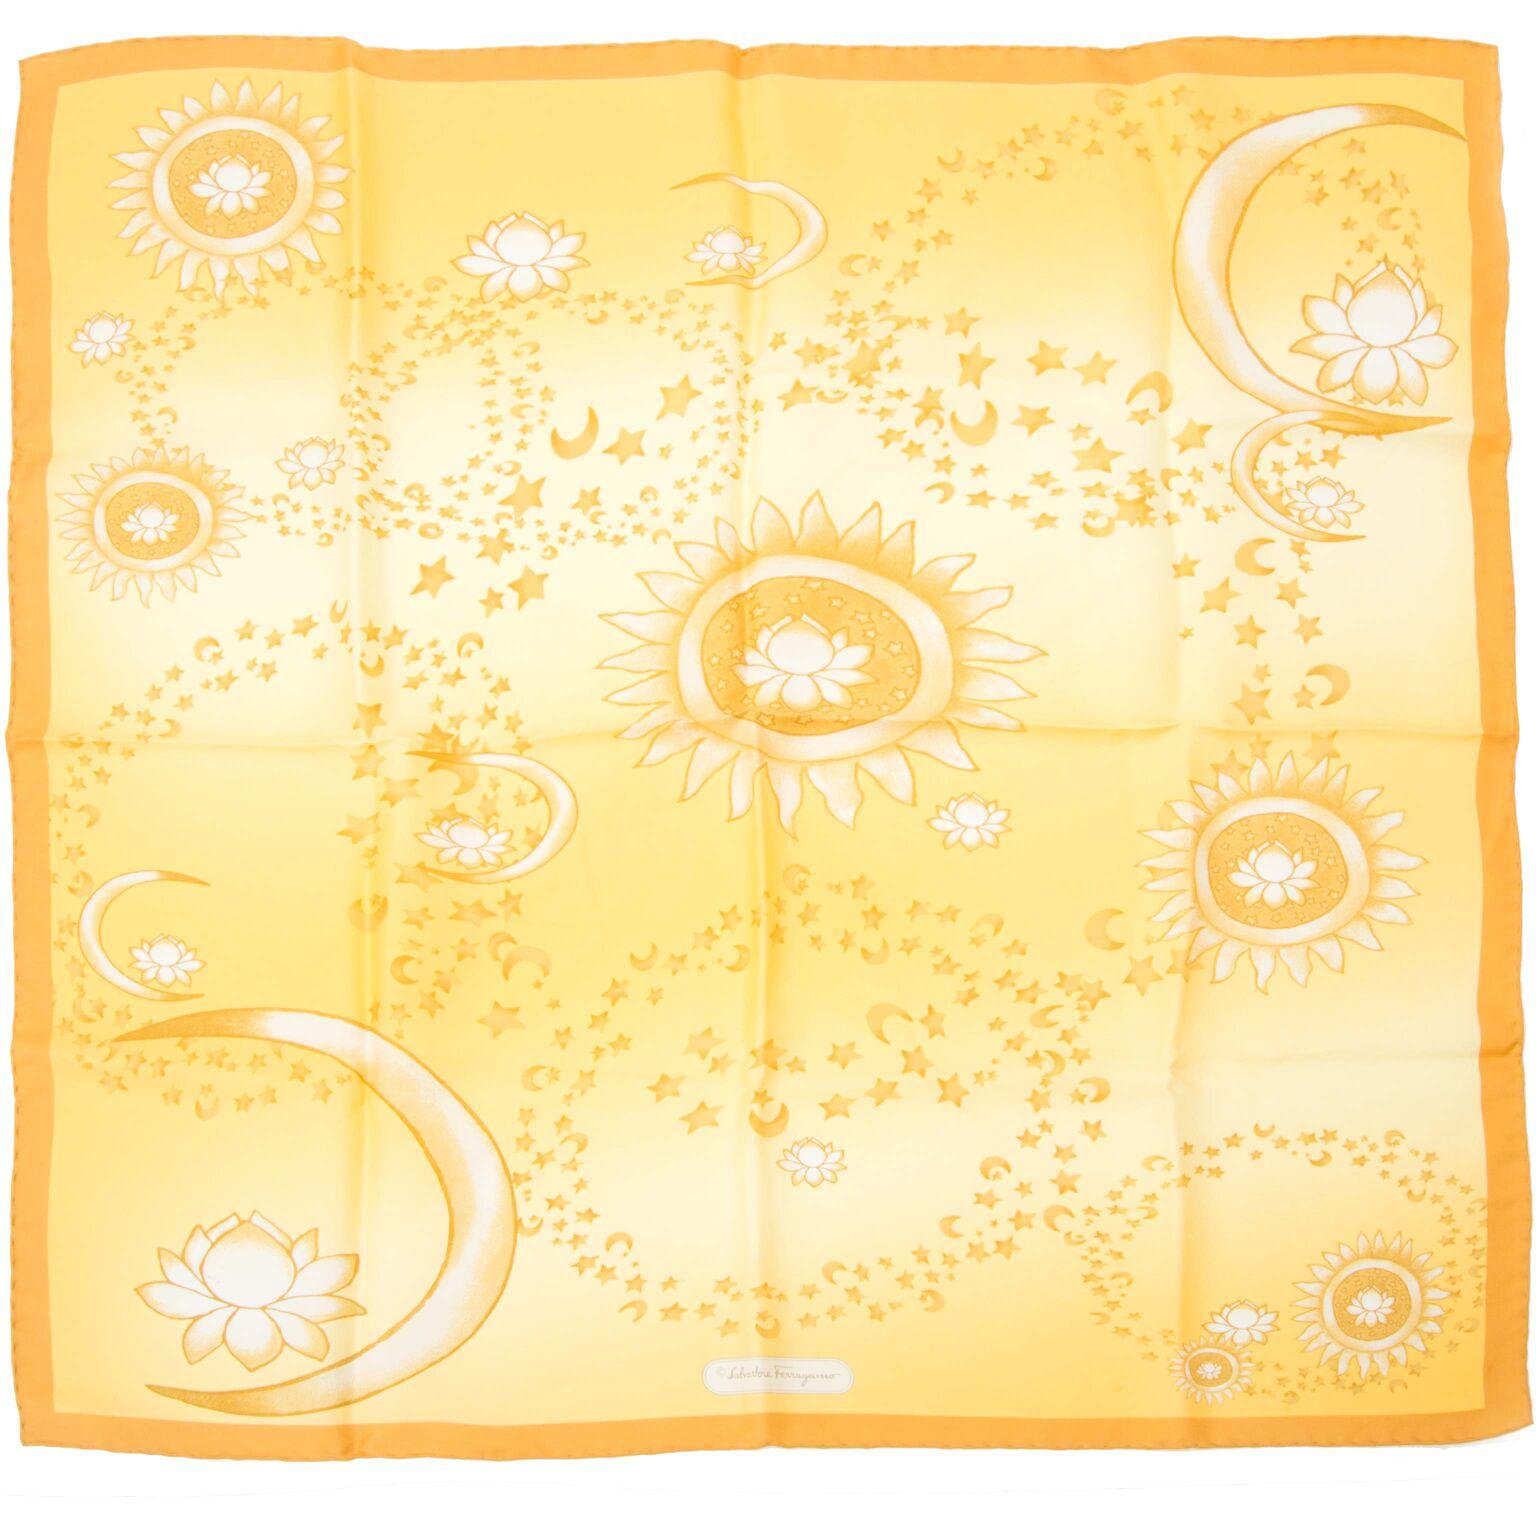 Good preloved condition

Salvatore Ferragamo Yellow Moon & Stars Silk Scarf

This soft yellow silk scarf from Salvatore Ferragamo, has a beautiful design that brings you in a oriental mood.

No care label attached